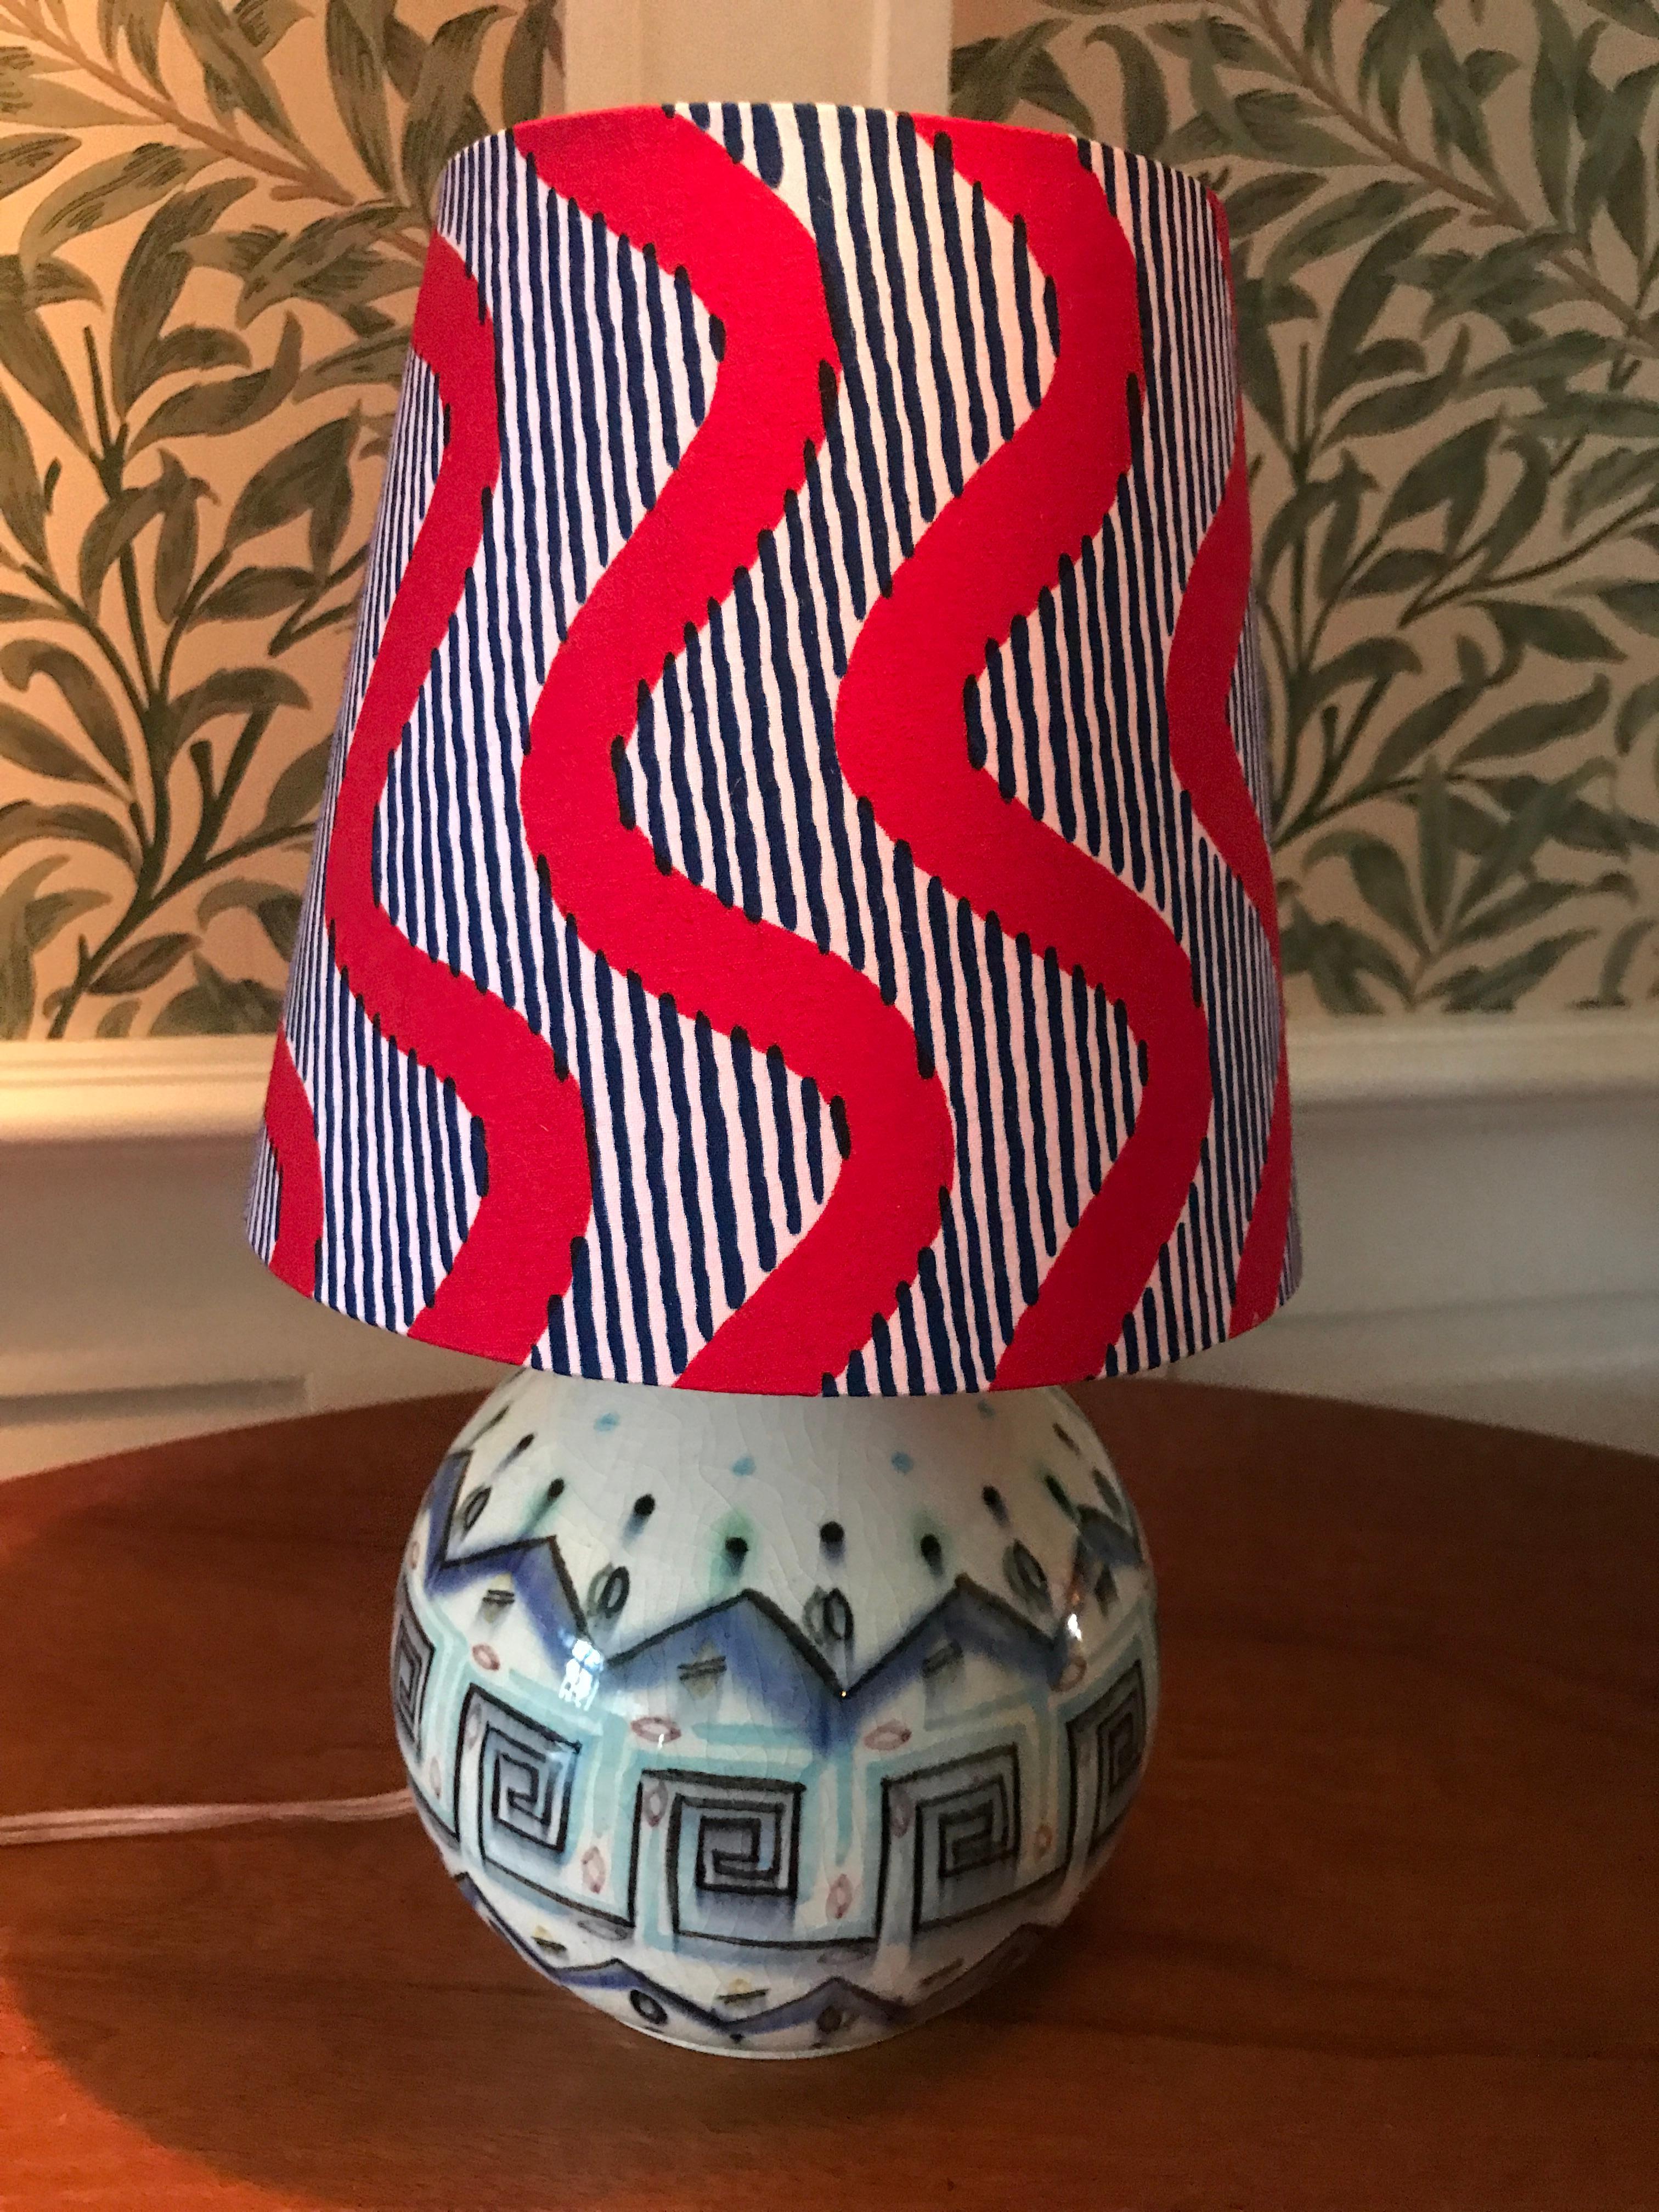 Lovely ceramic table lamp with a blue geometric design. New lampshade.